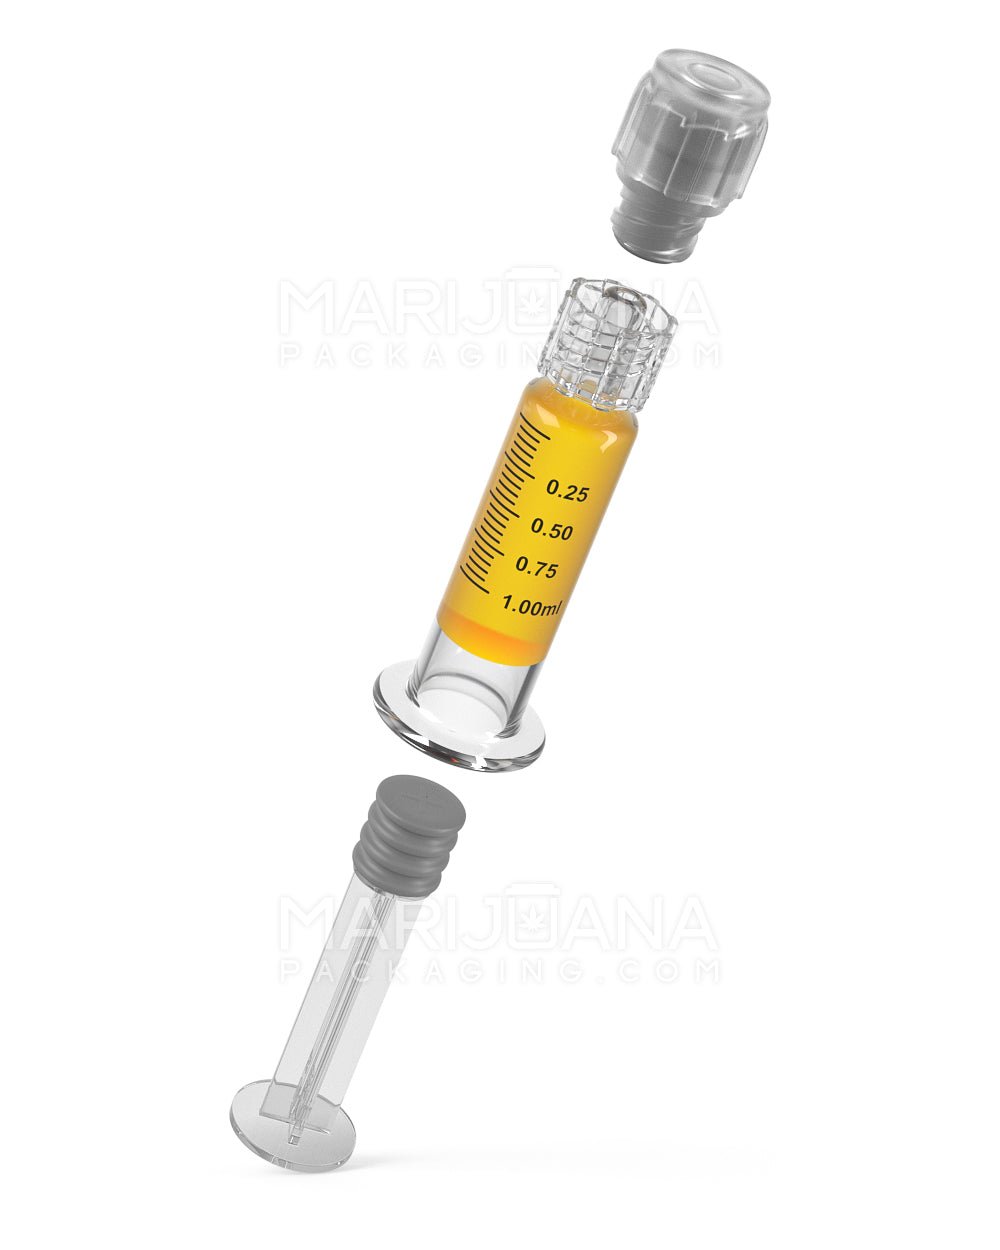 Child Resistant & Luer Lock | Glass Dab Applicator Syringes | 1mL - 0.25mL Increments - 100 Count - 7